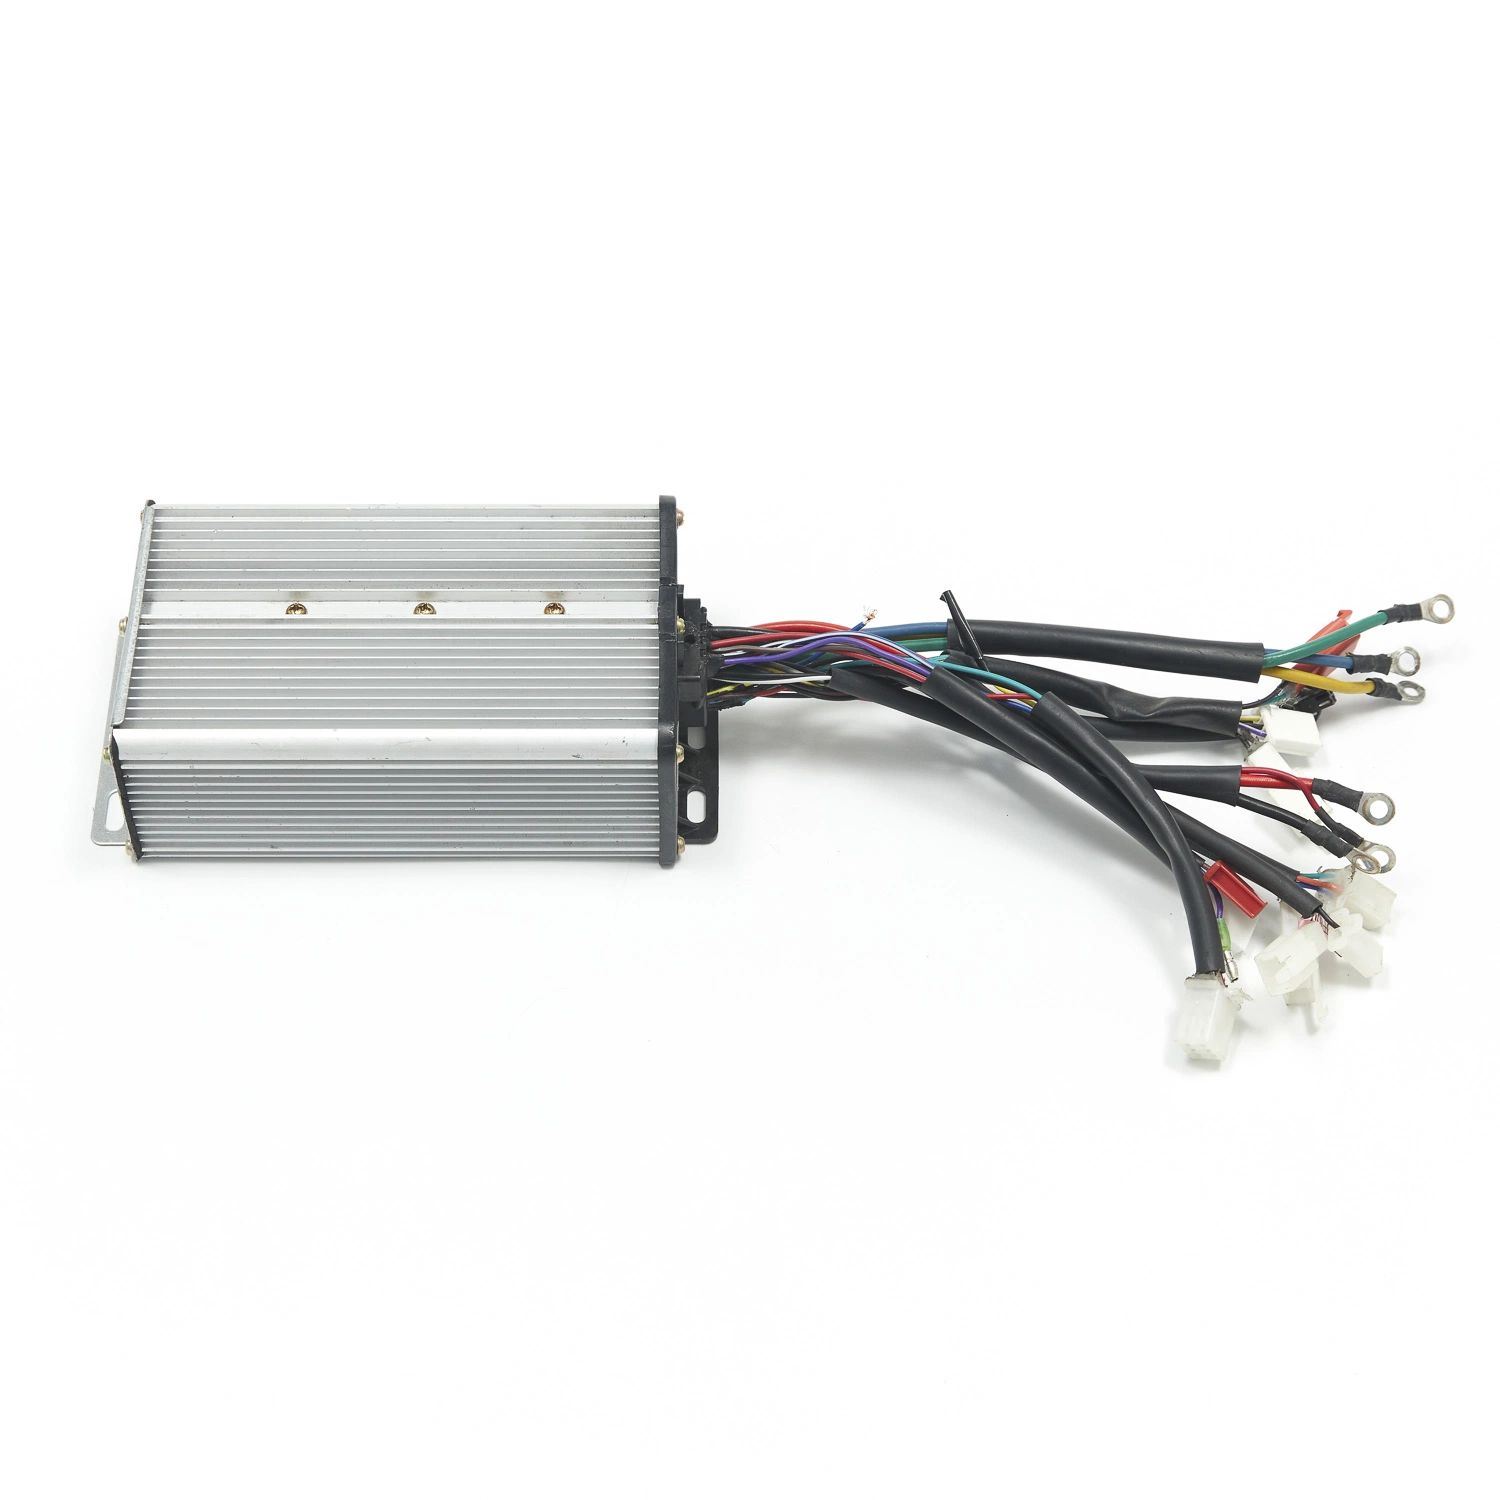 High Power 60V72V 1500W Brushless Motor Controller for Electric Tricycle Ebike Motorcycle